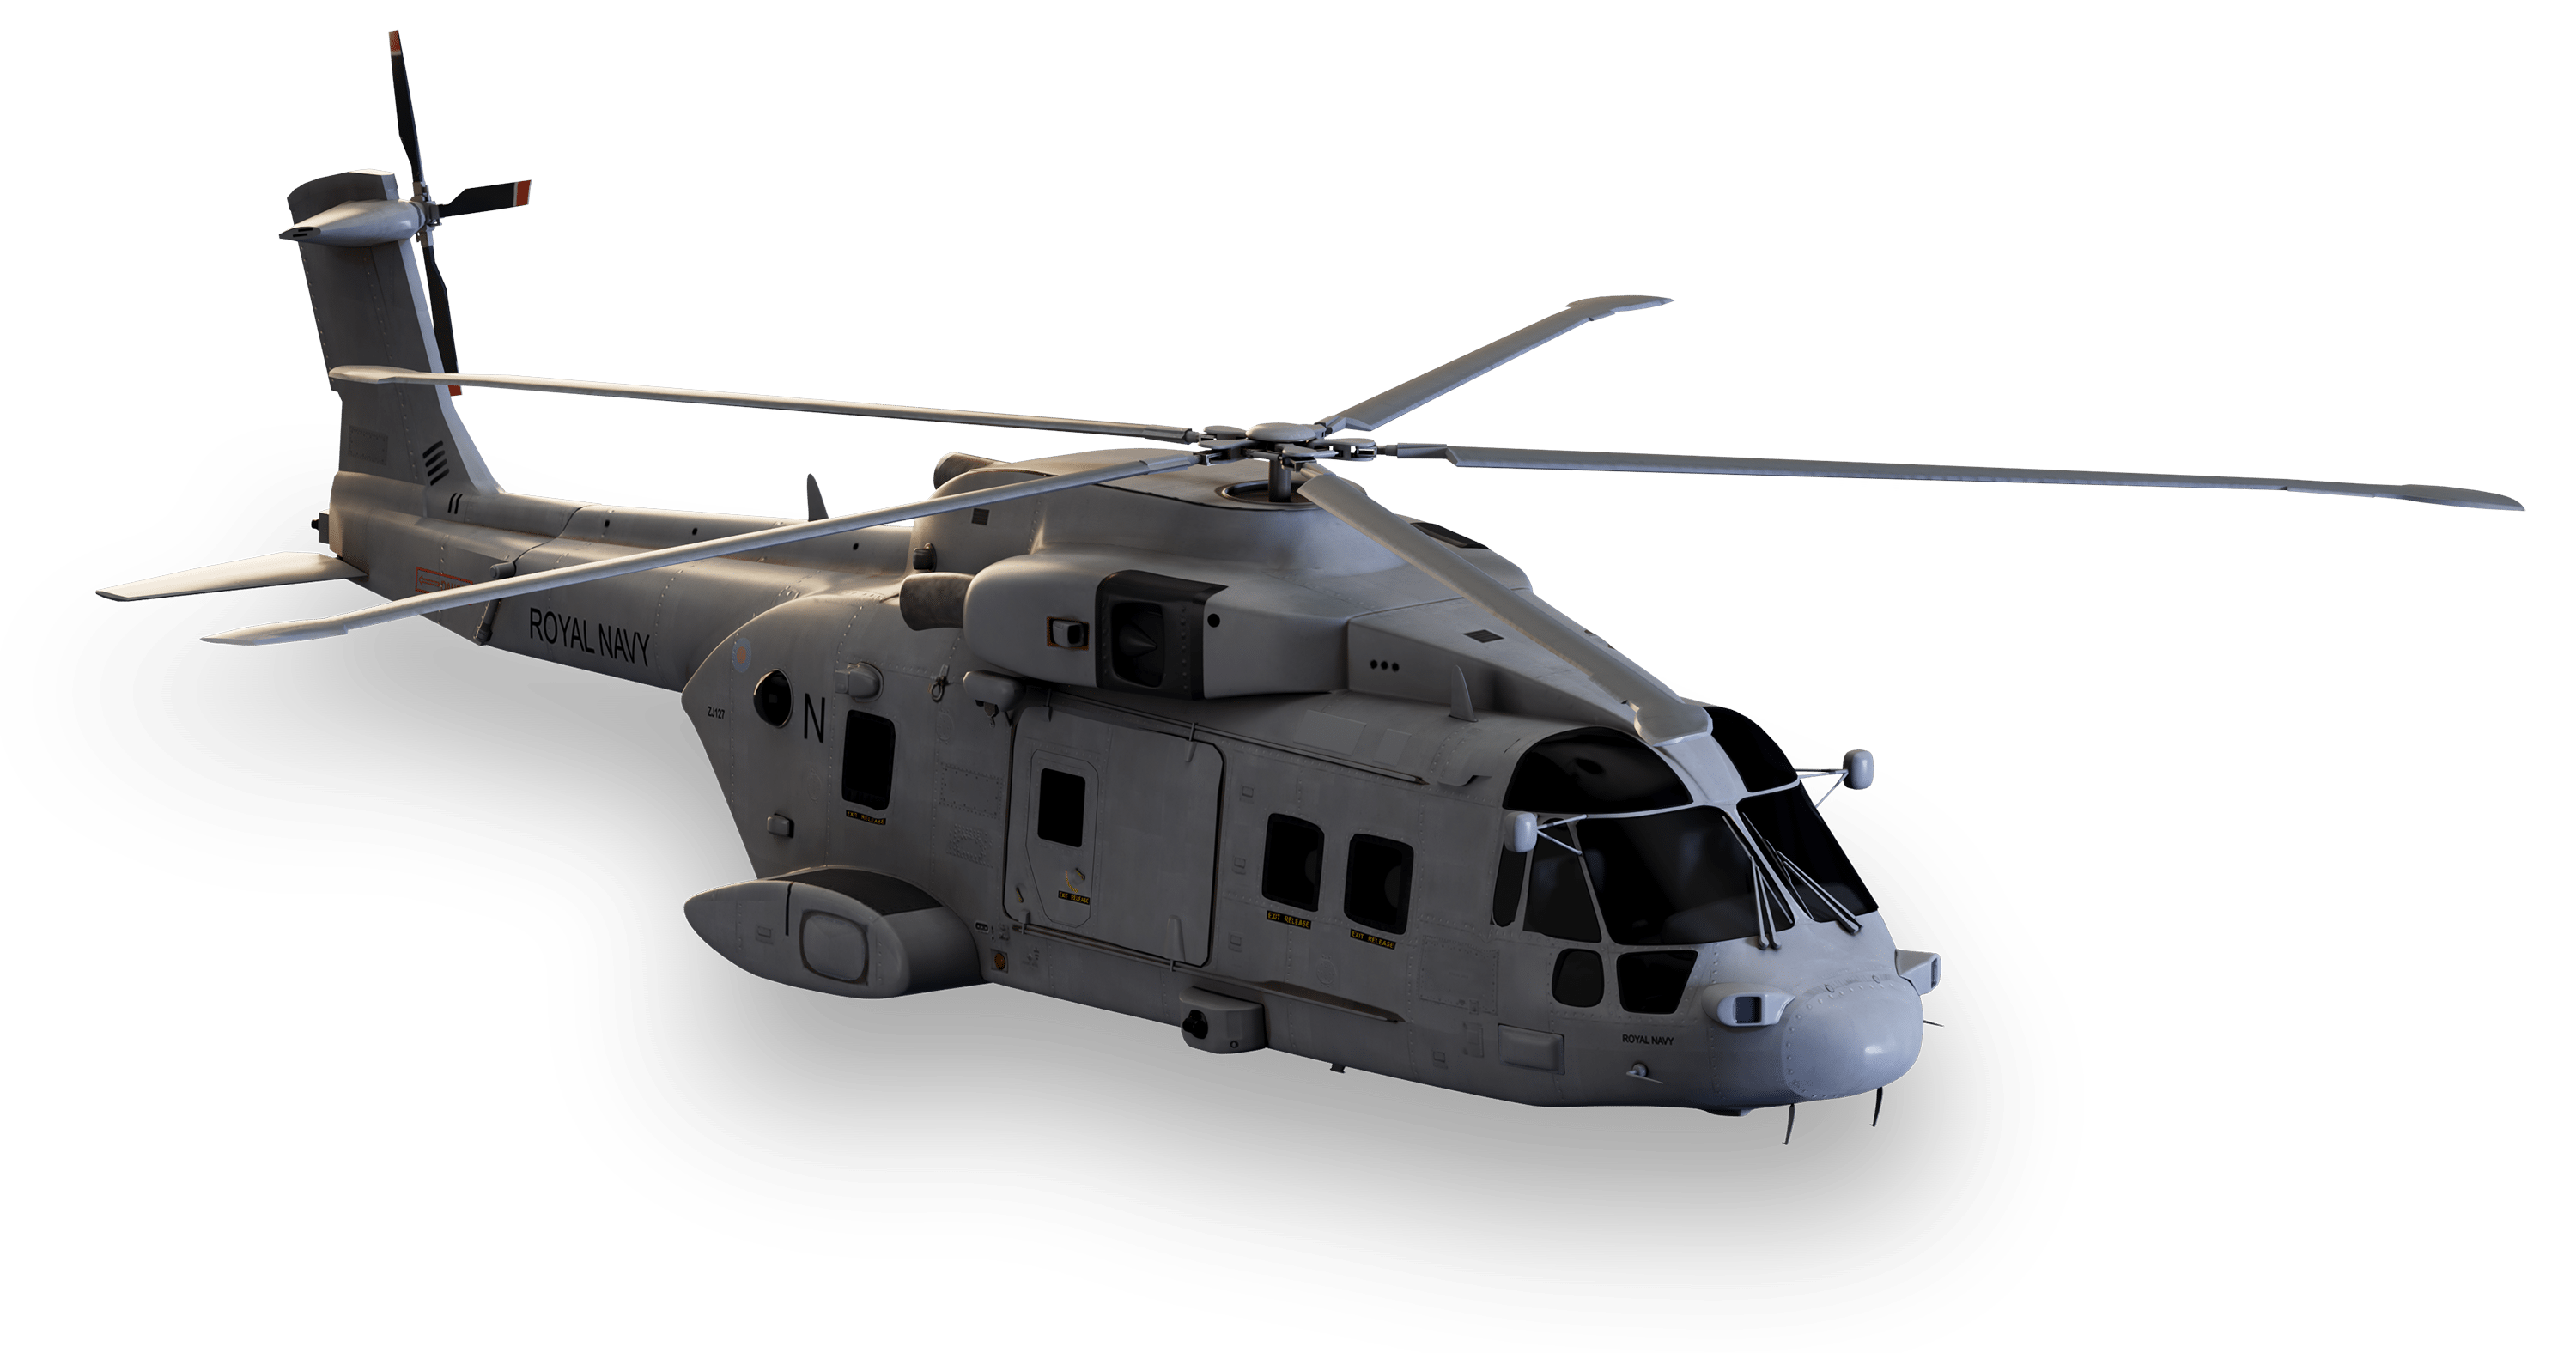 3D visualisation of Merlin helicopter